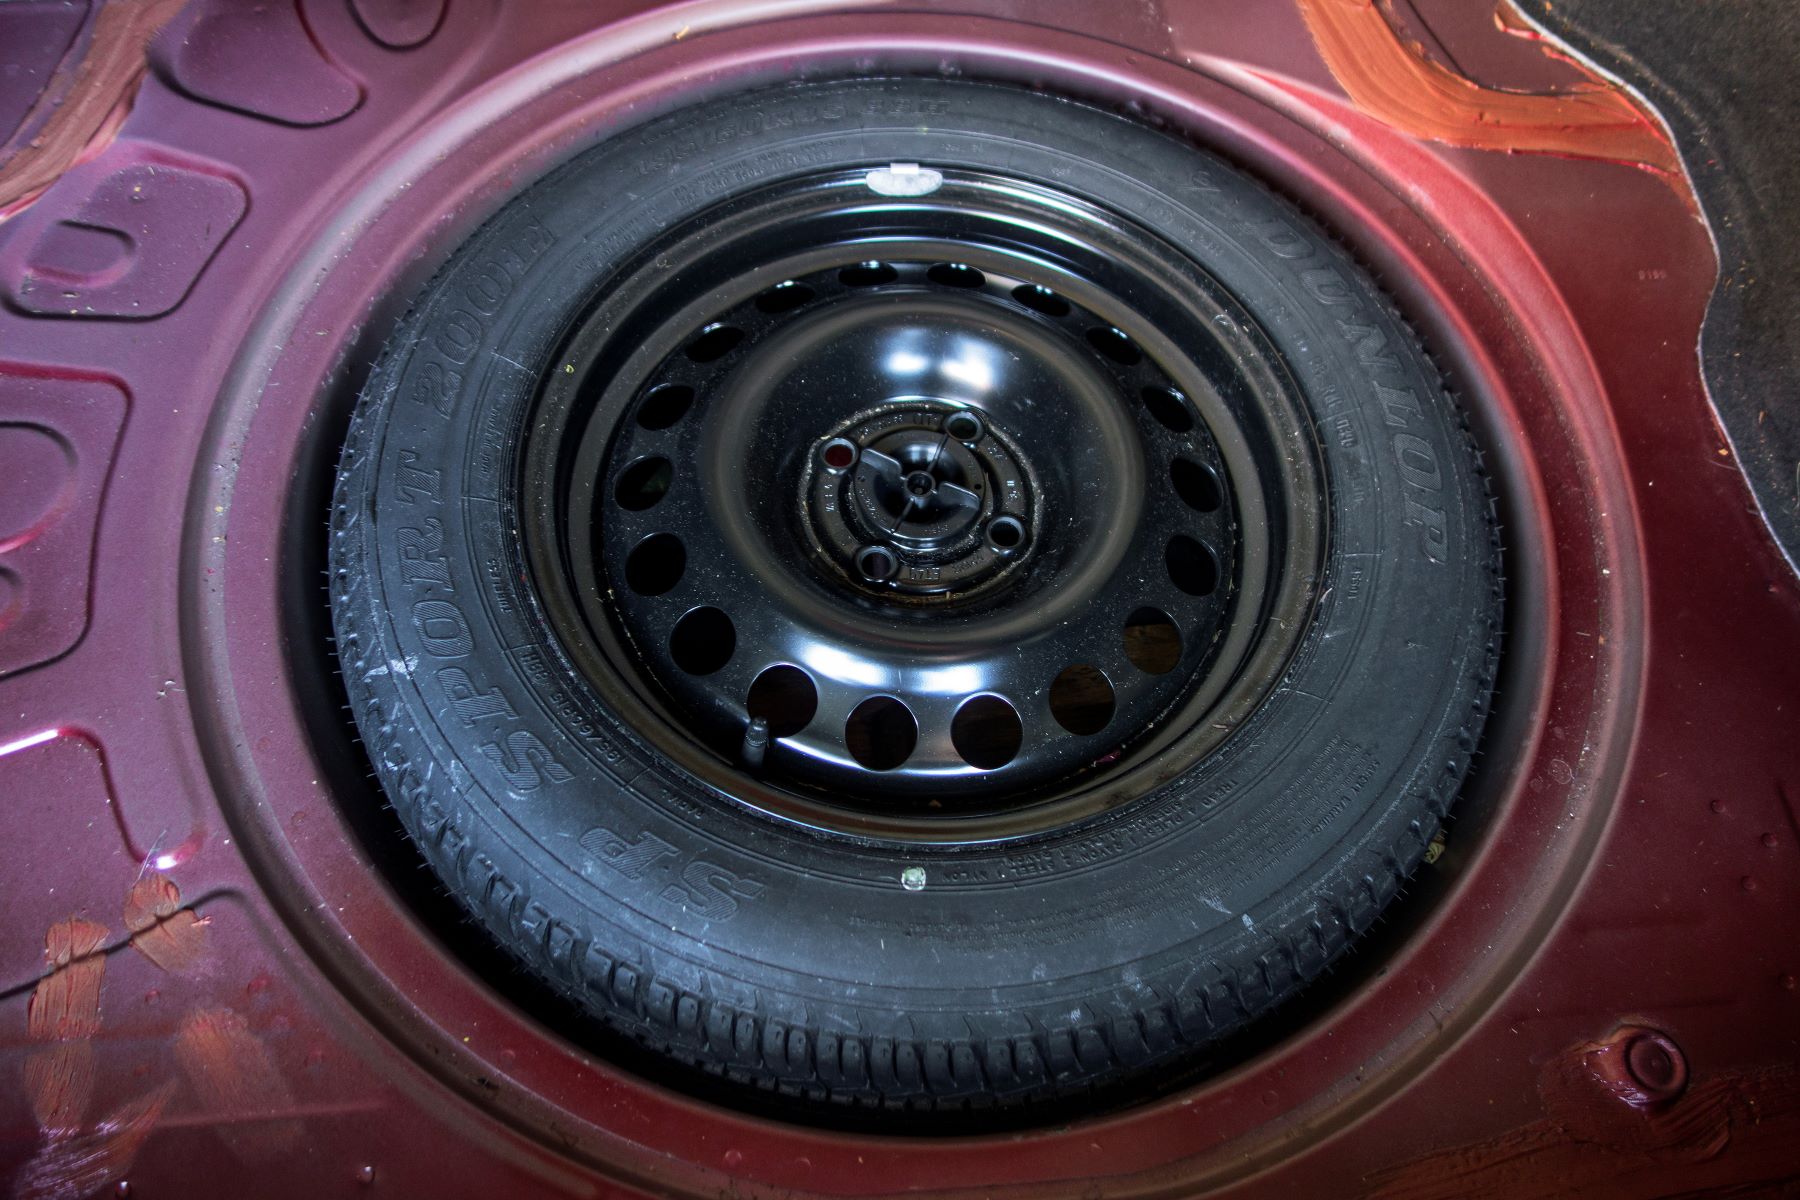 A full-size spare tire stowed in the trunk of a car